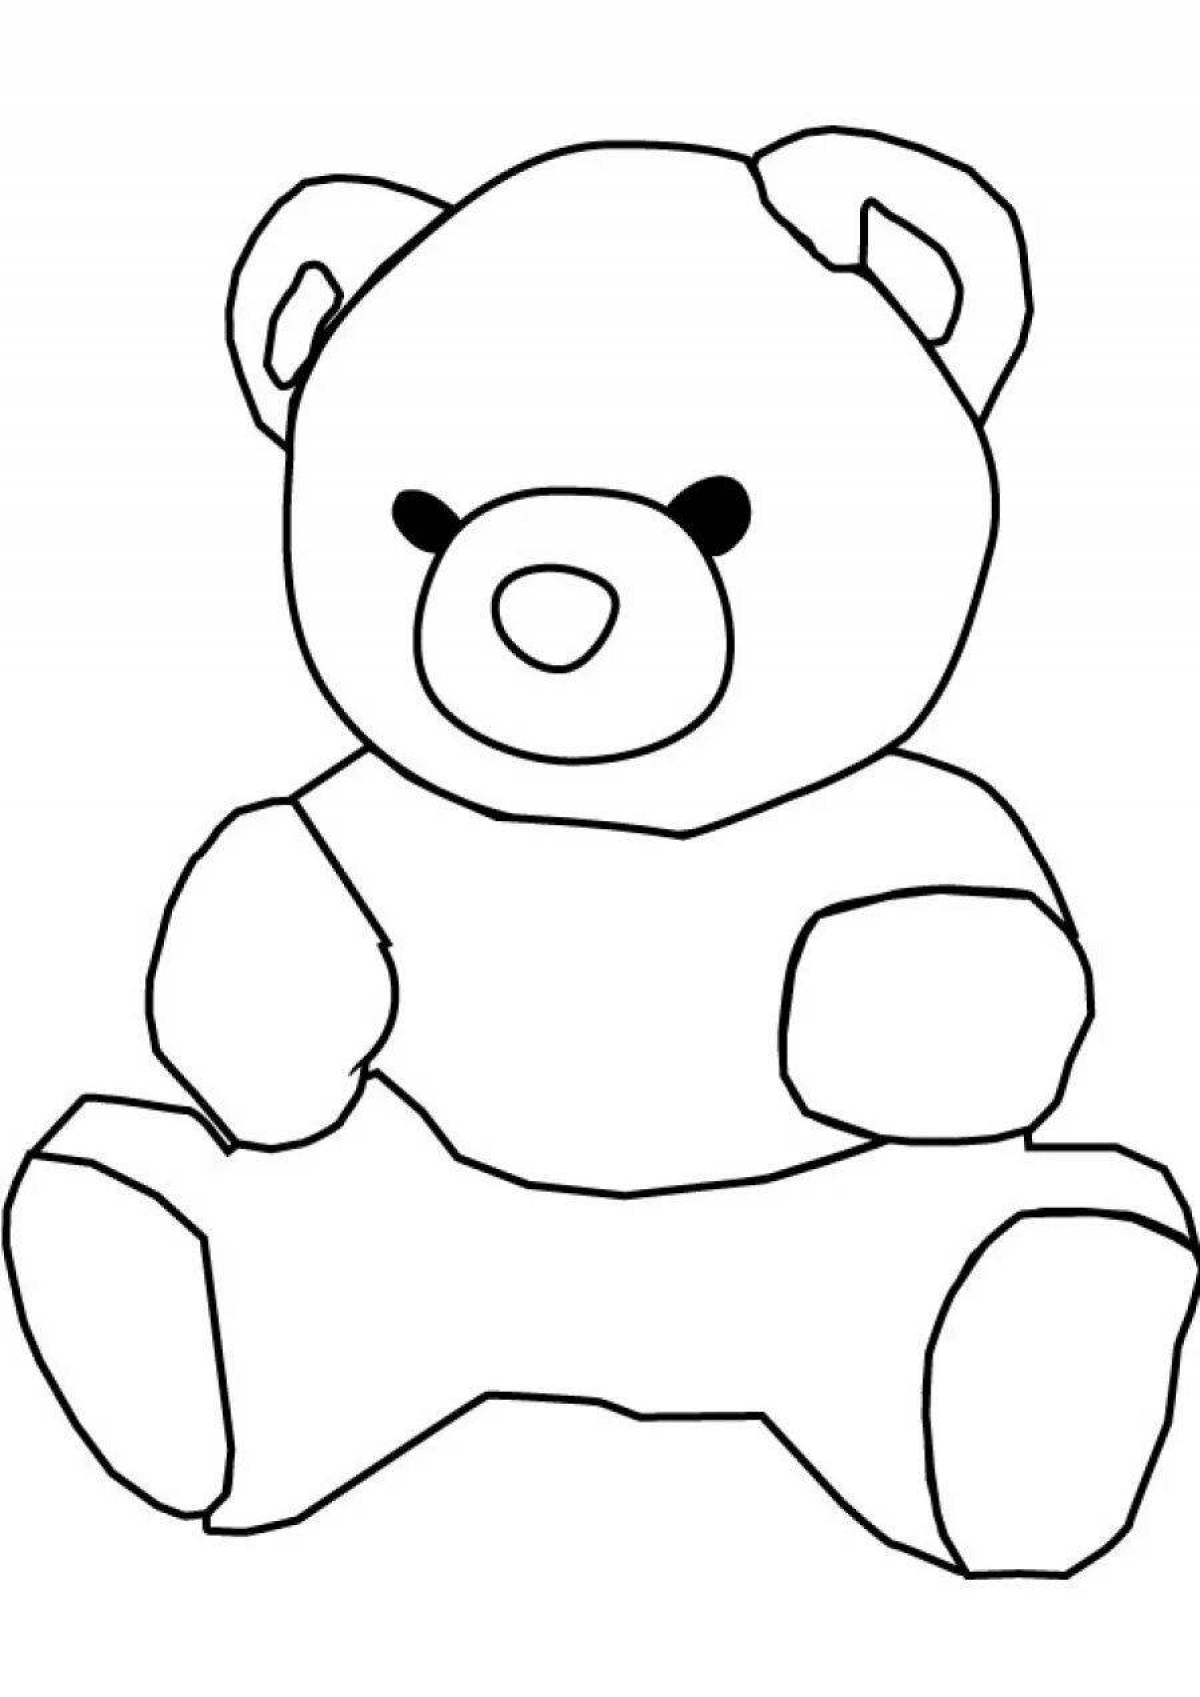 Soft teddy bear coloring page